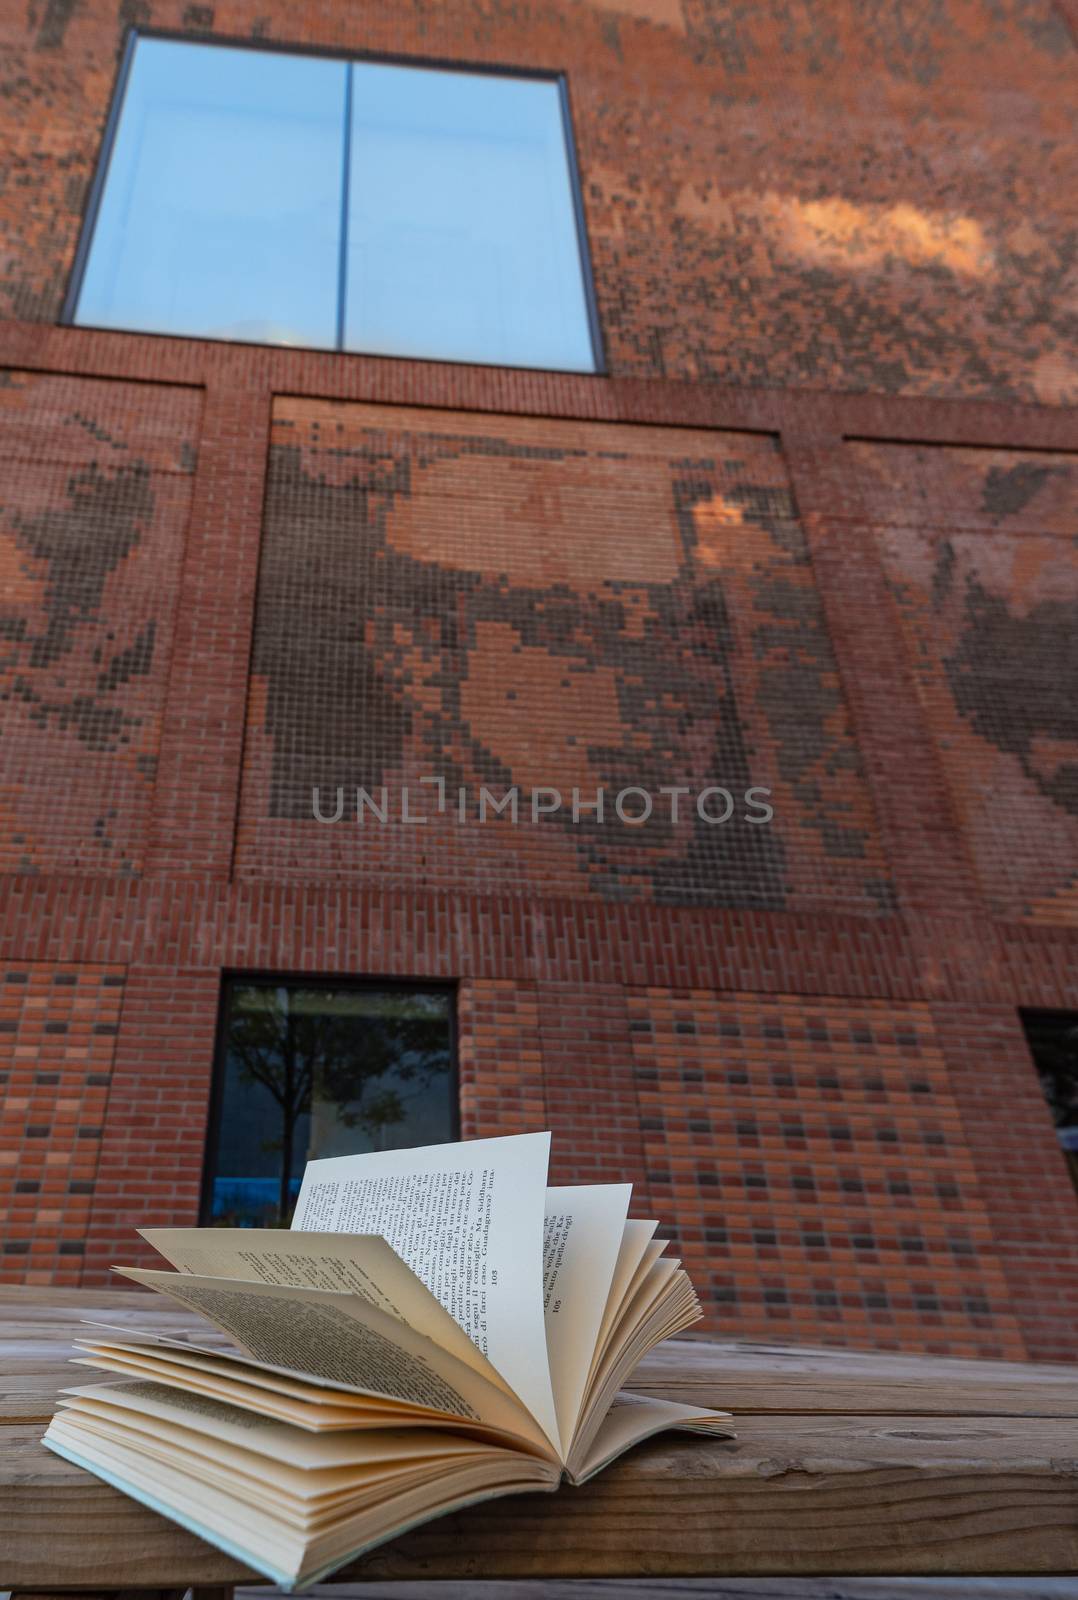 An open book resting on a bench in front of a red brick building with a stained glass window reflecting the blue sky